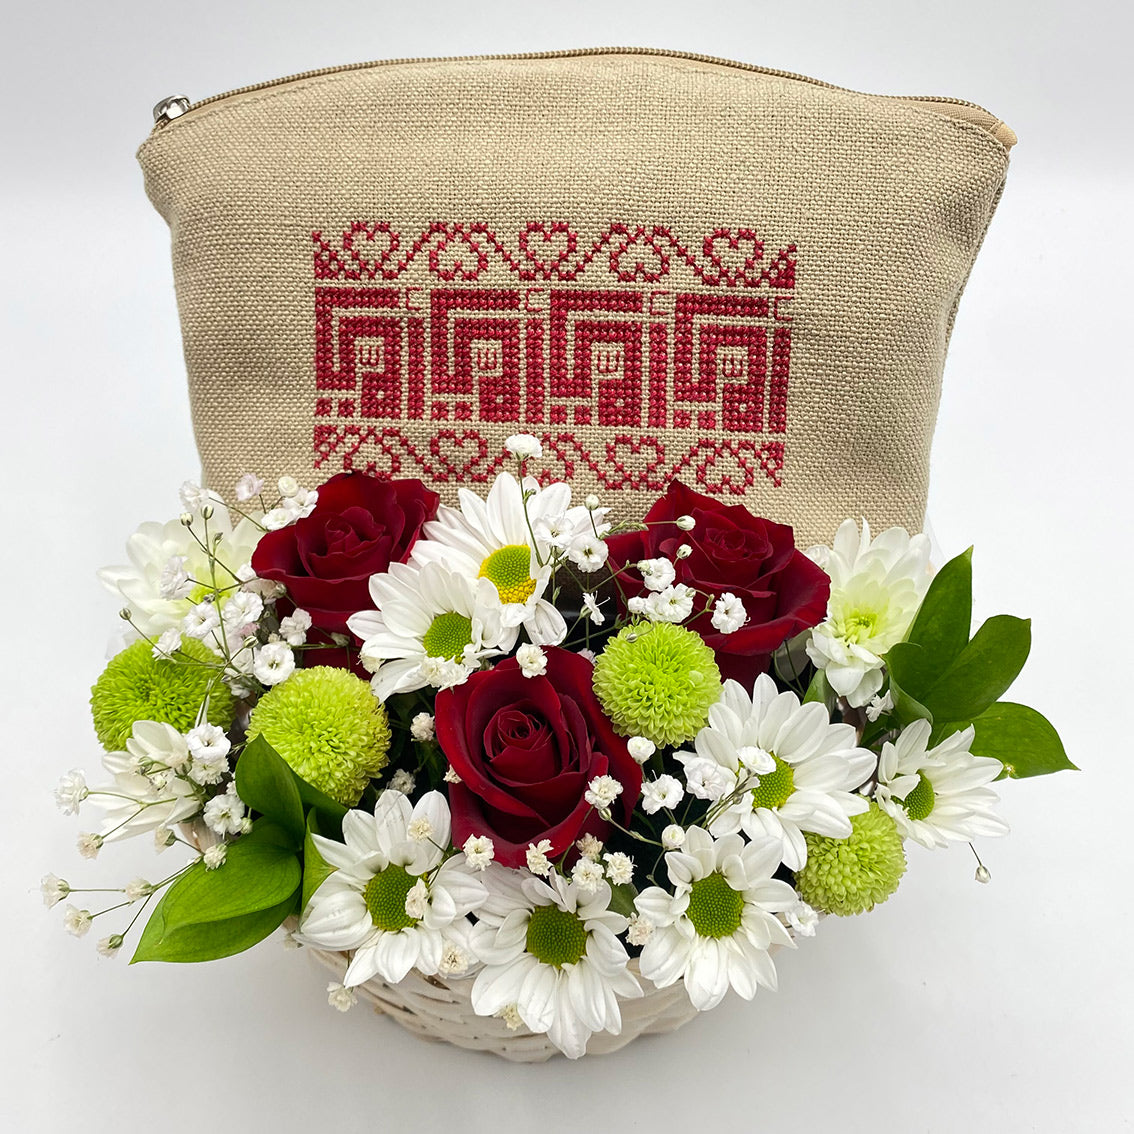 Mom Embroidery Bag with Mixed Flowers